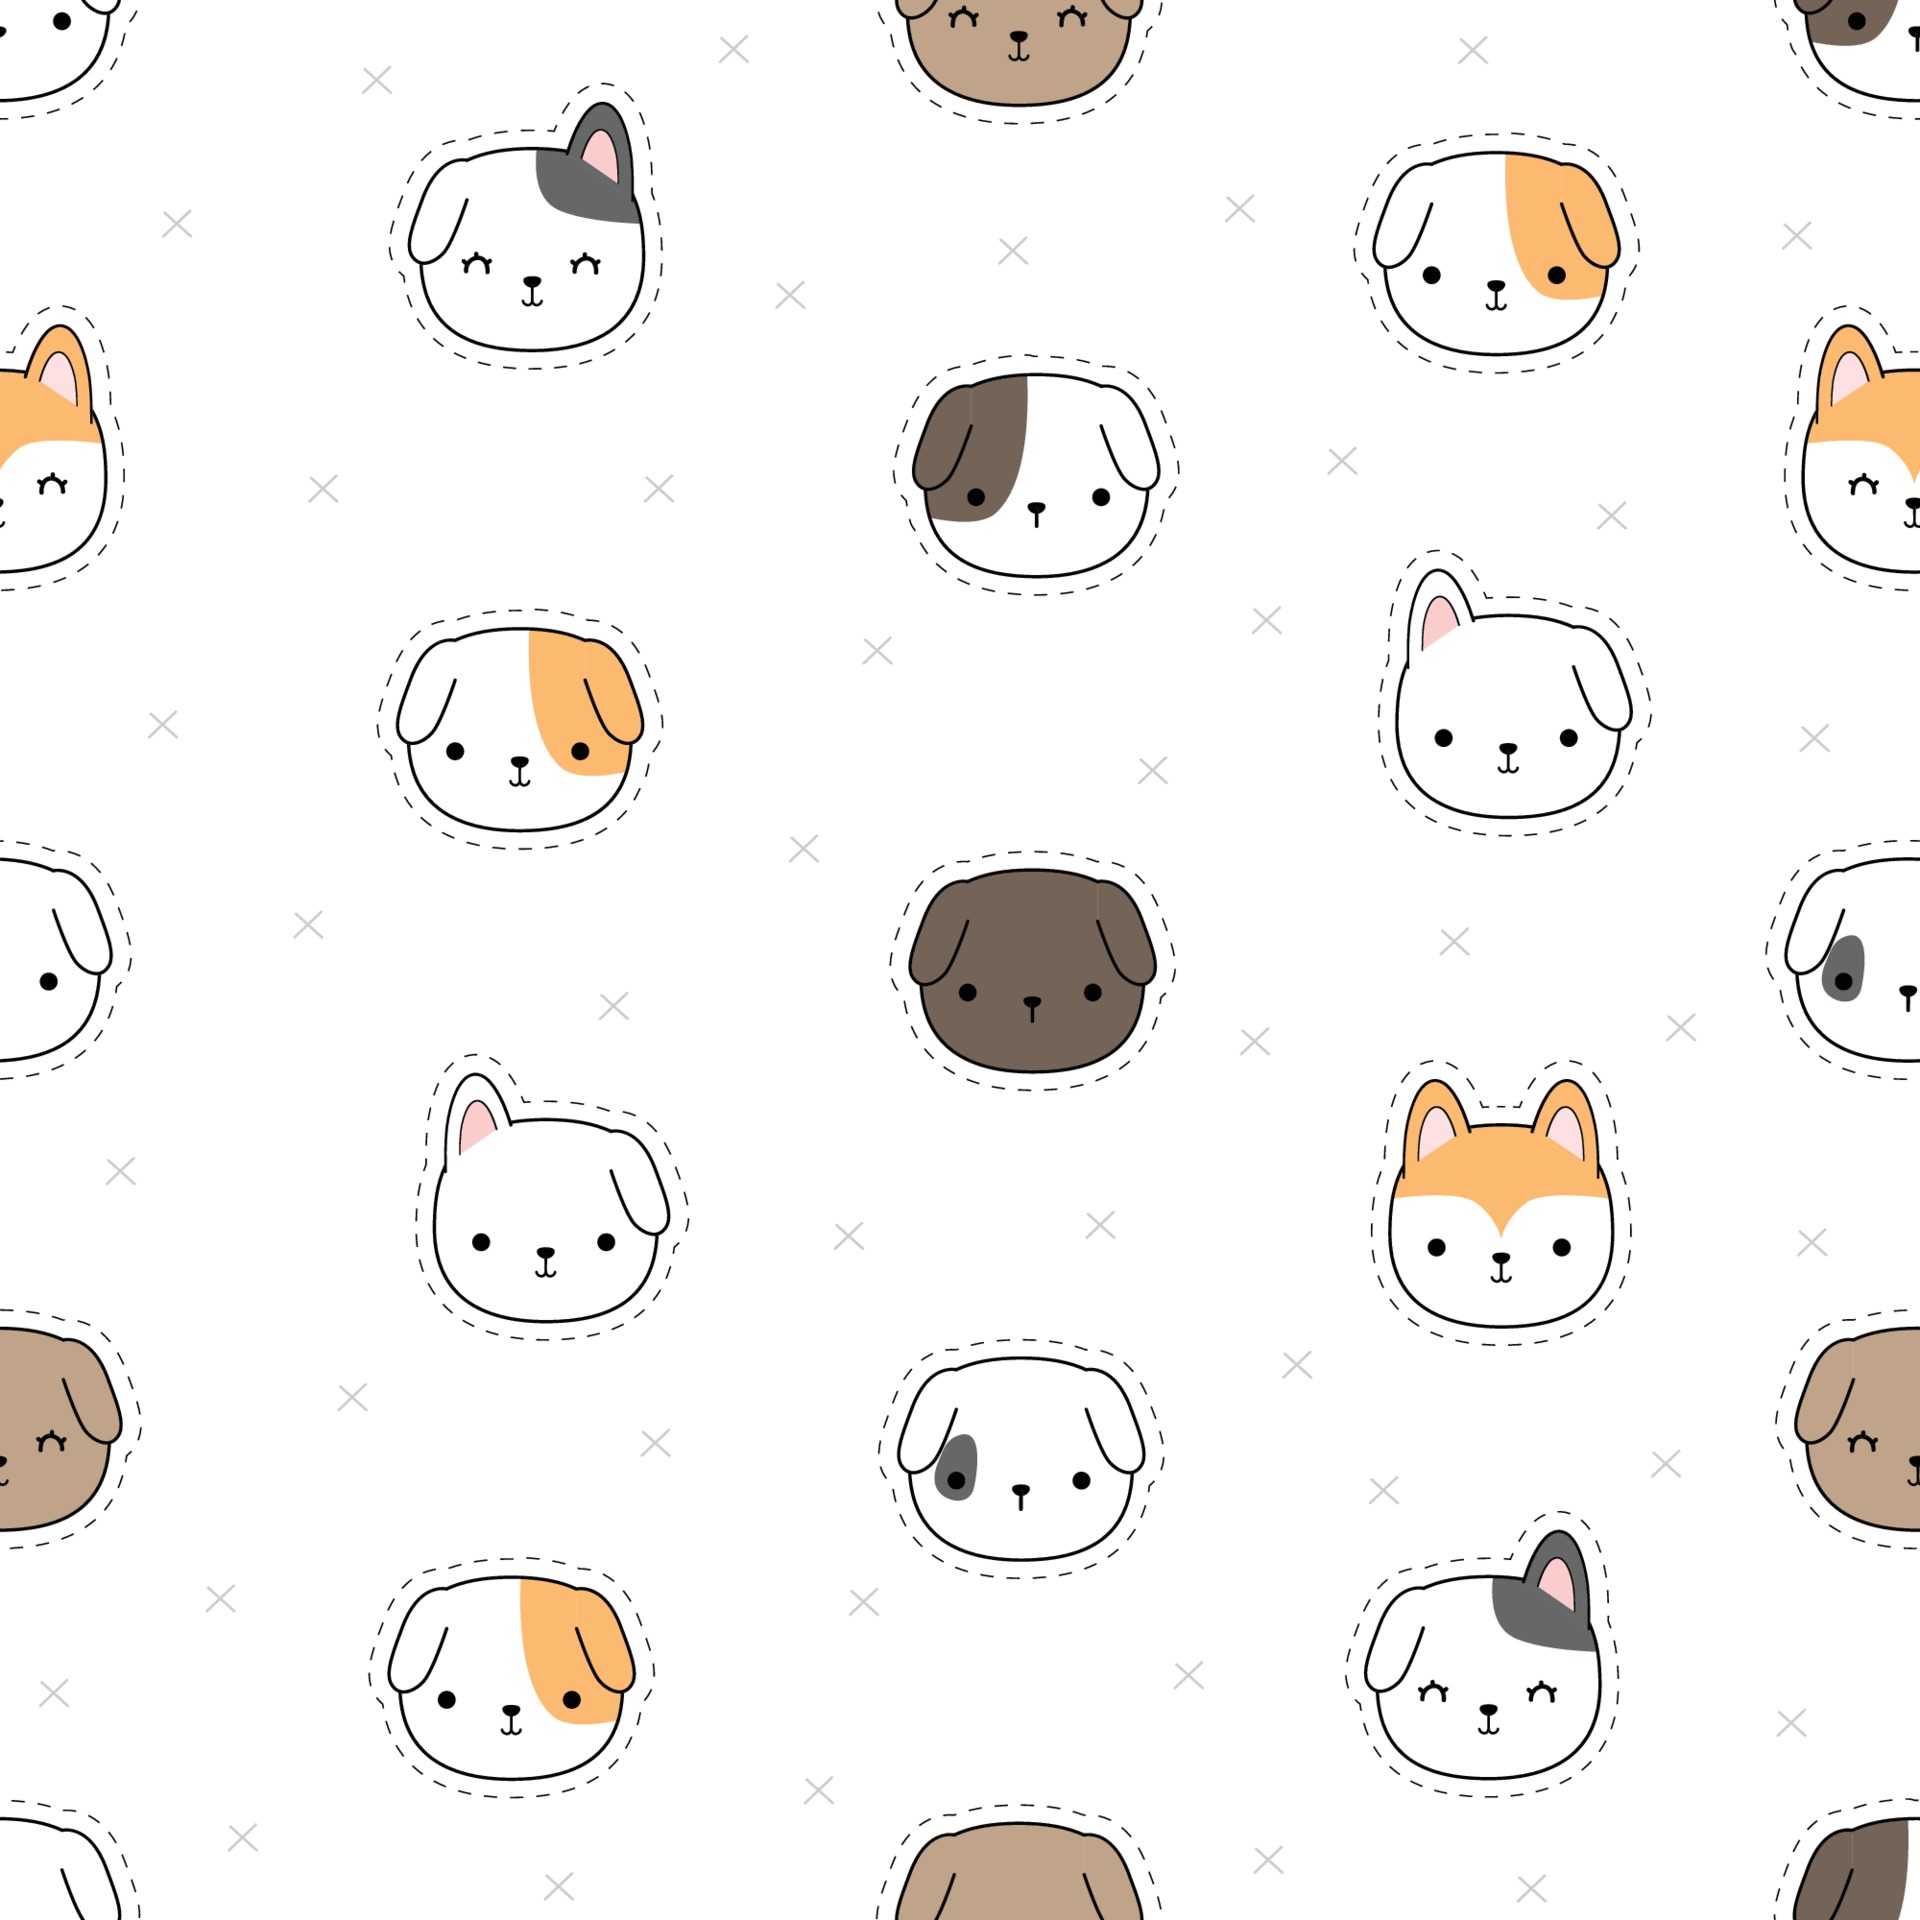 Kawaii Cute Dog Wallpapers HD APK for Android Download